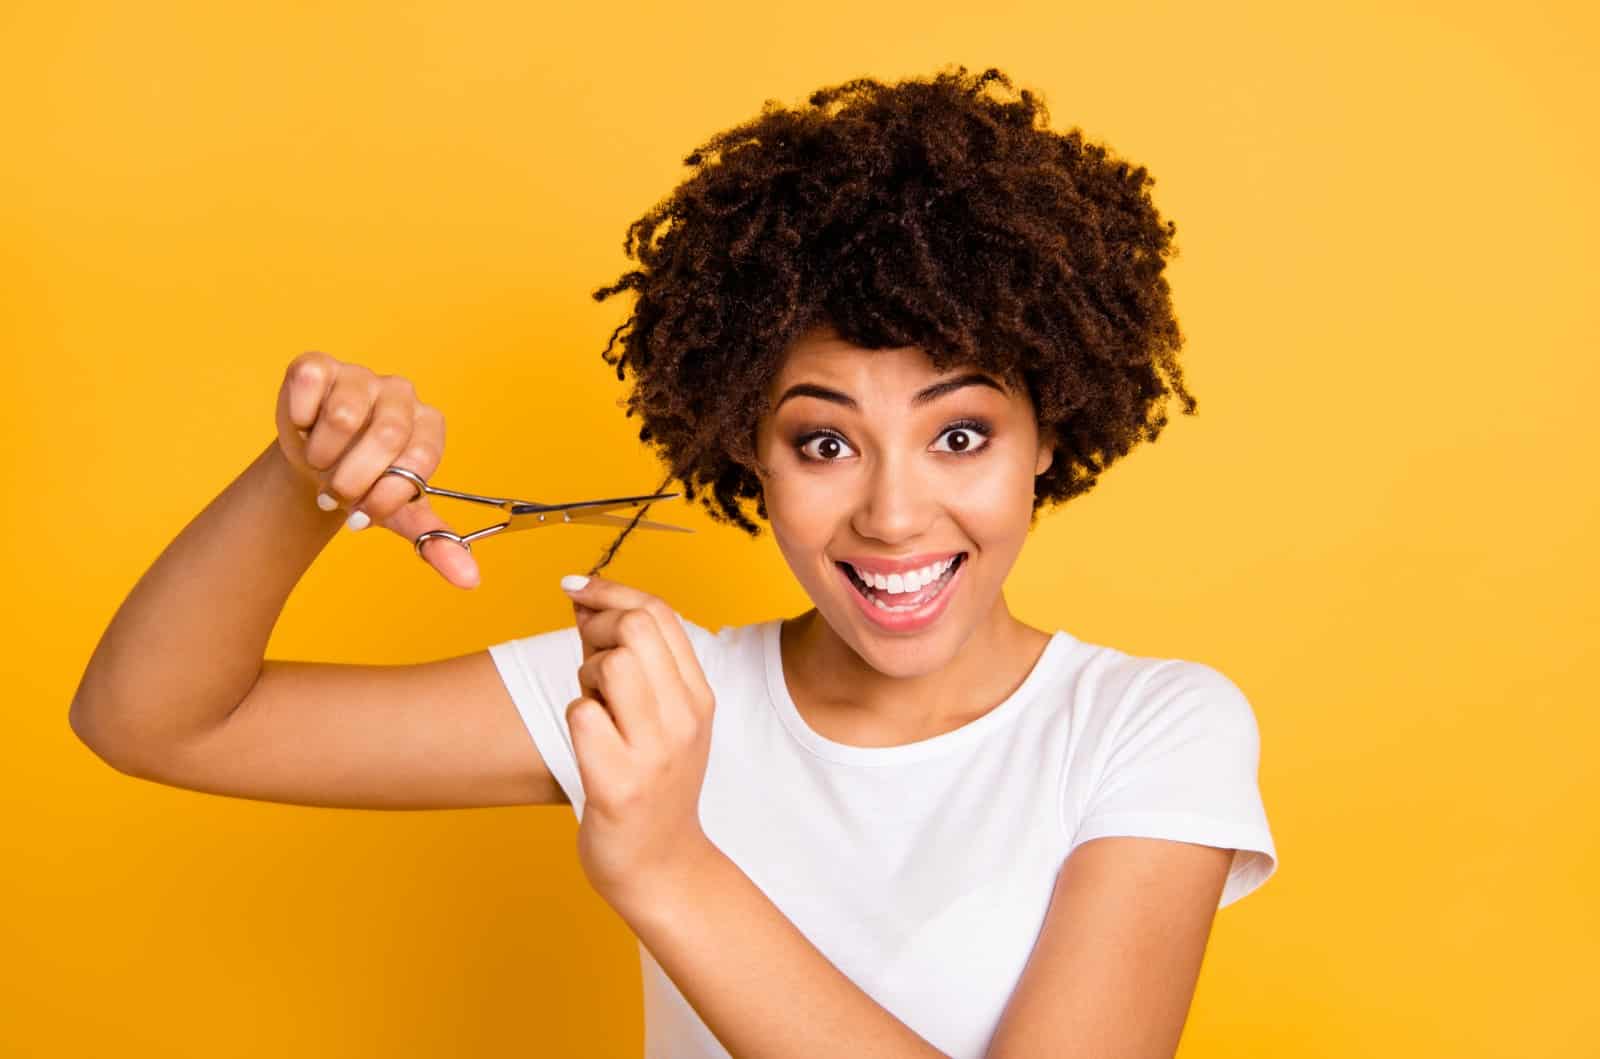 Signs your hair needs to be trimmed